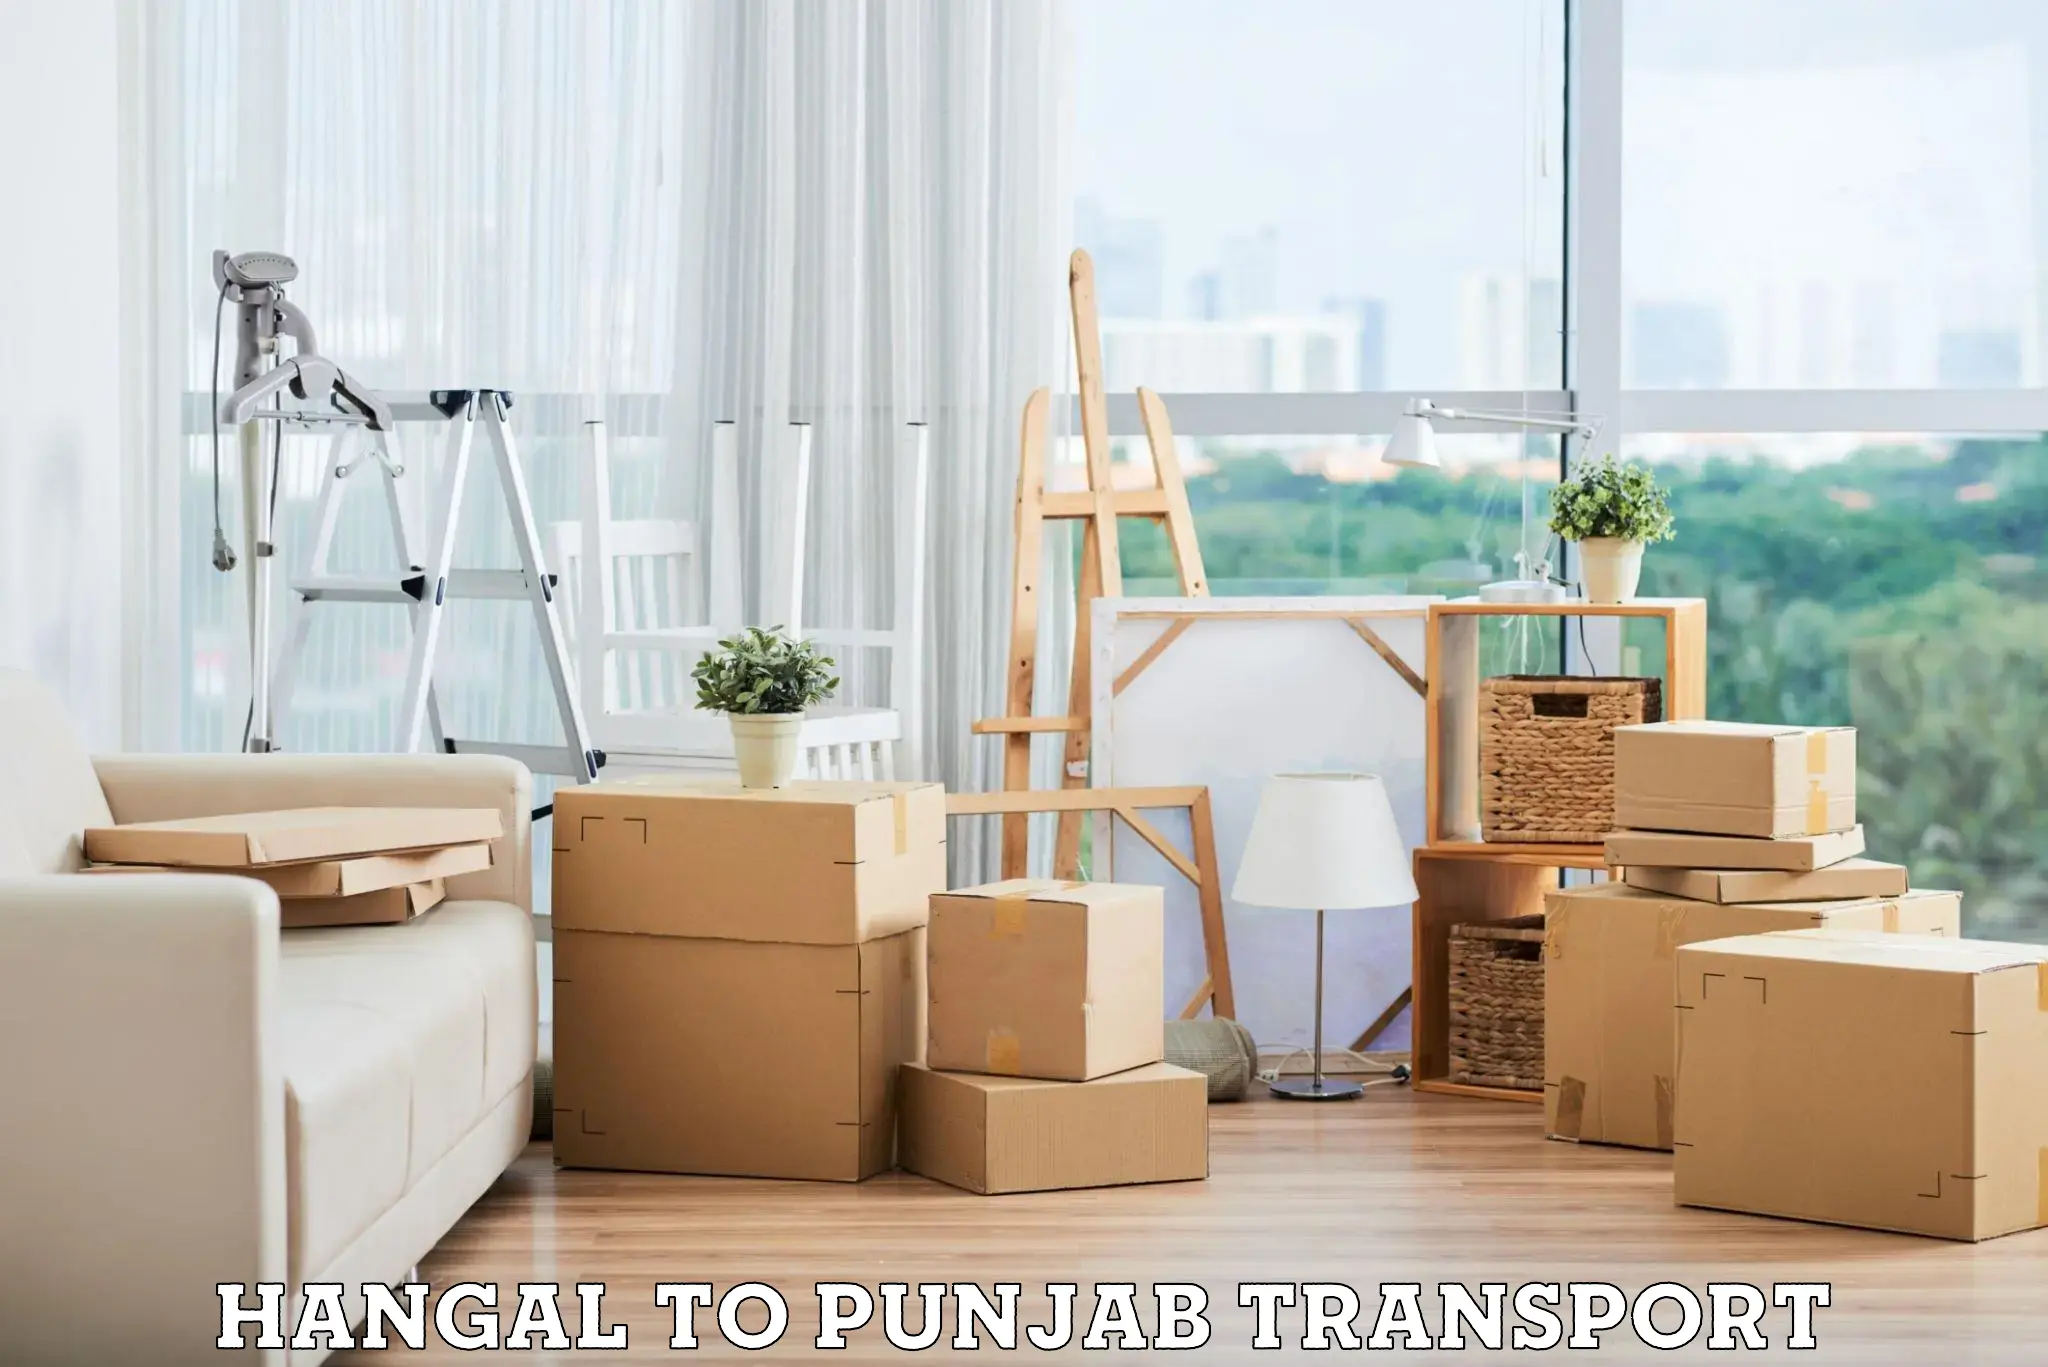 Vehicle transport services in Hangal to Dinanagar